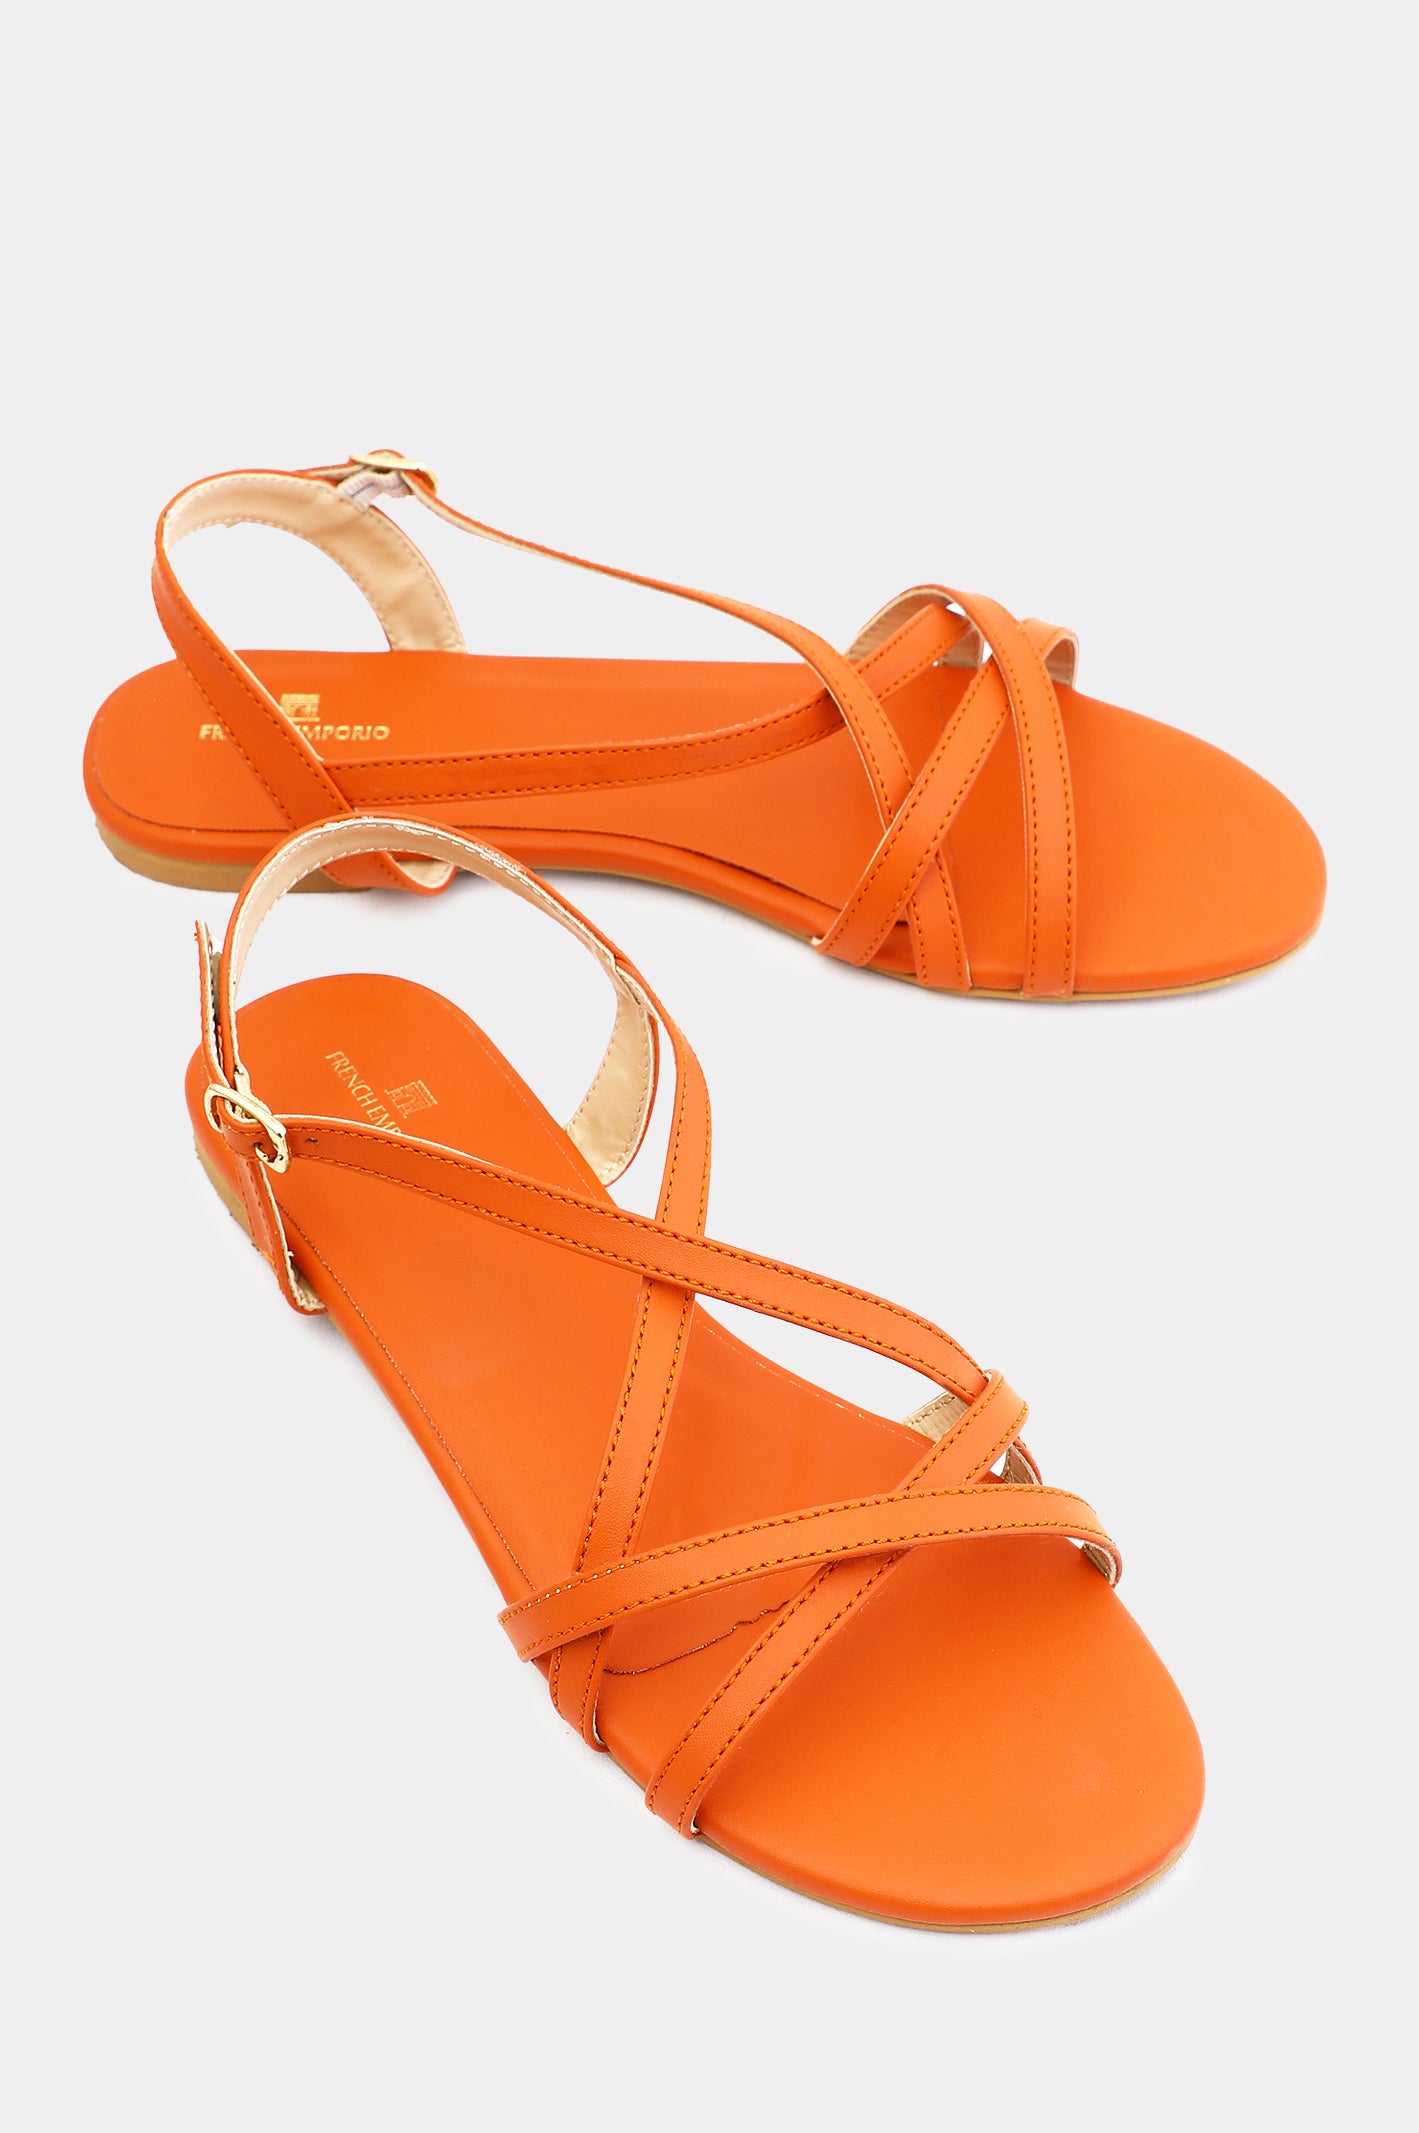 Ladies Formal Sandals From Diners